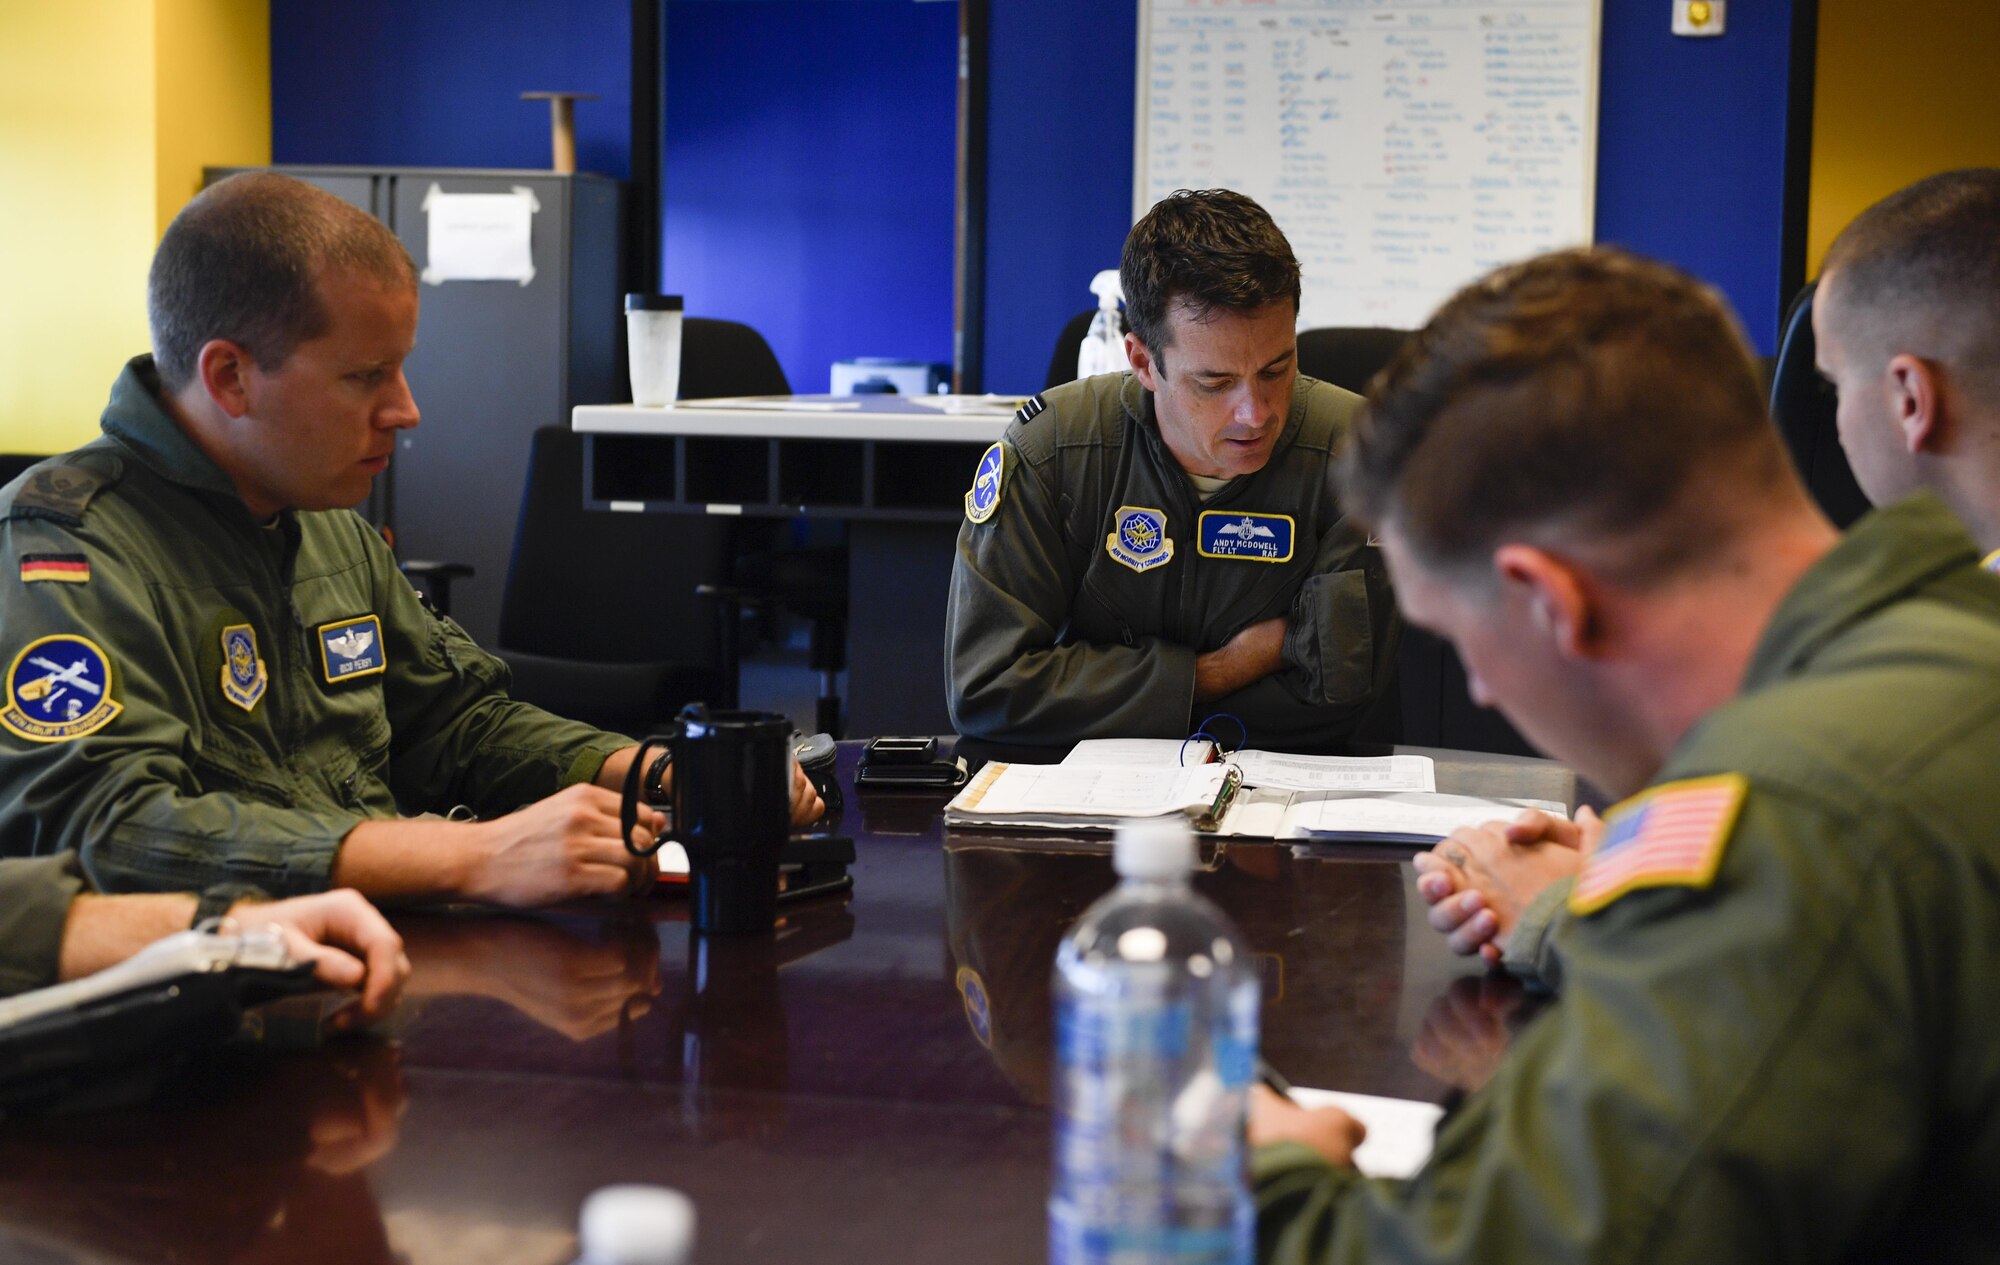 Aircrew members assigned to the 14th and 15th Airlift Squadrons, participating in the foreign exchange pilot program, discuss mission details prior to a flight here June 26, 2017. The program strives to promote mutual understanding and trust, enhance interoperability, strengthen air force to air force ties, and develop long-term professional and personal relationships between partnered countries.